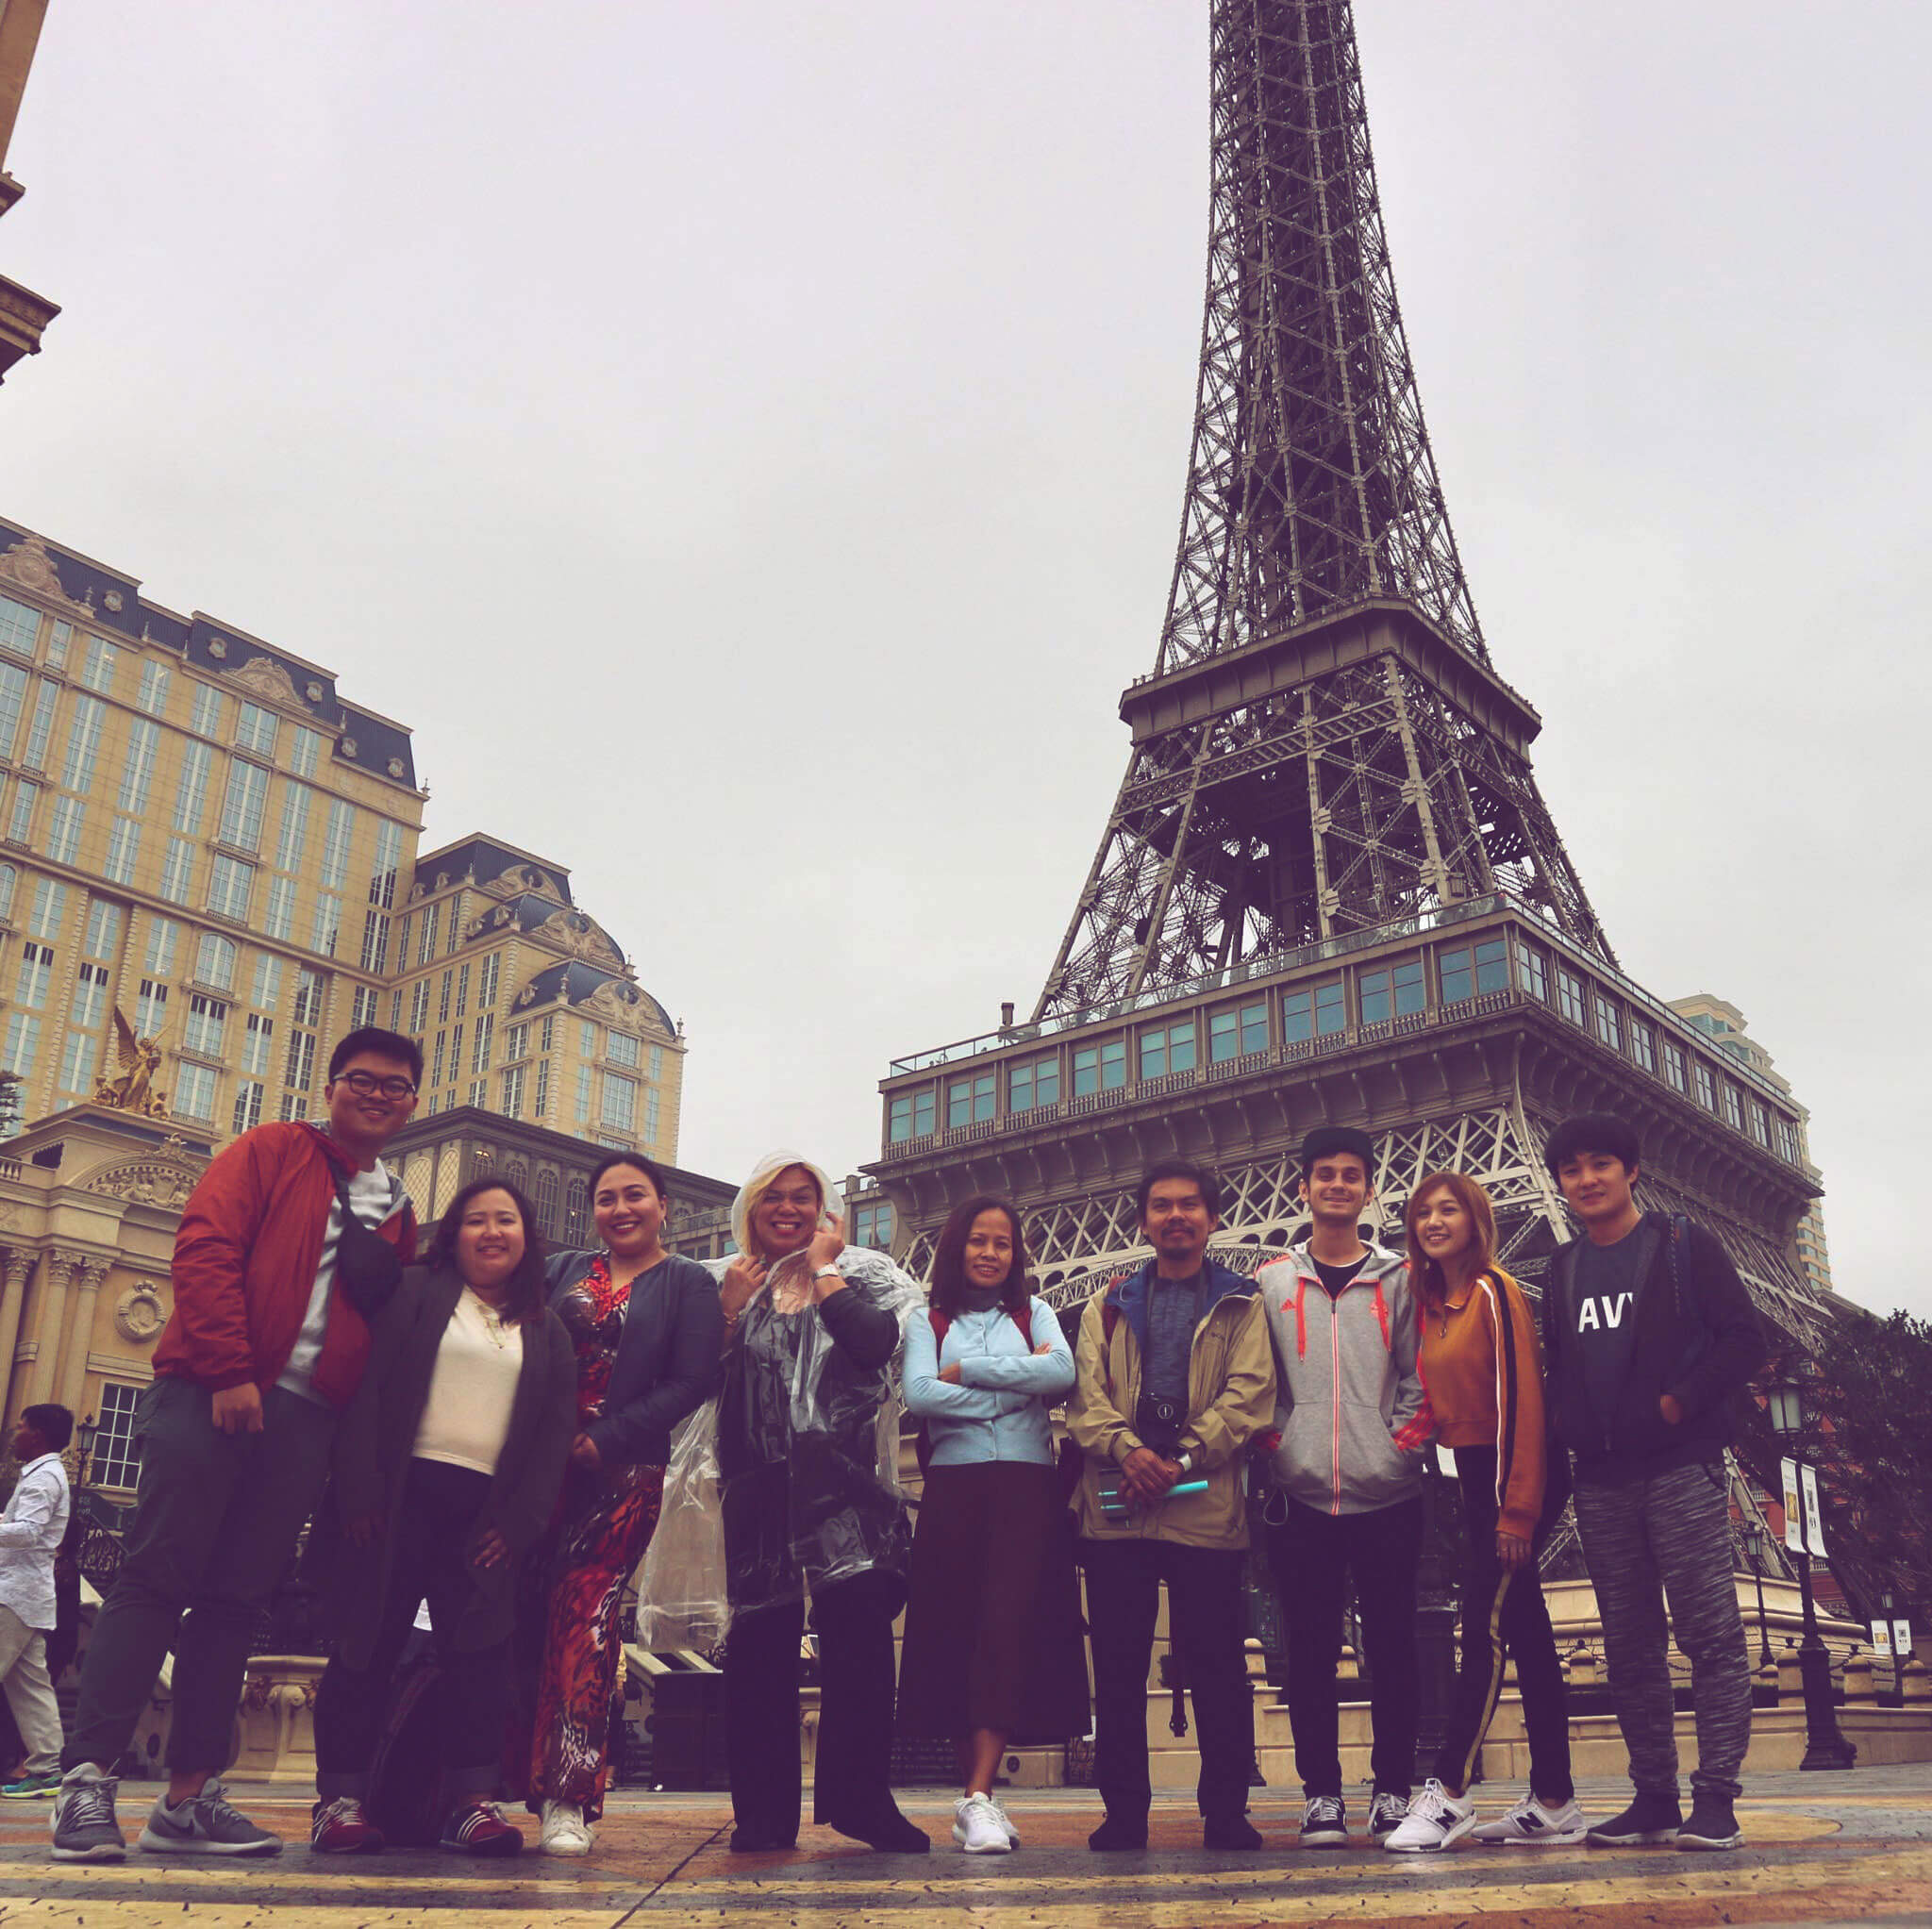 CEBxKlookTravels Team Macau. Our group of Cebu bloggers and writers in front of the replica of Eiffel Tower in the Parisian in Macau. (From left) Ryan Calle, Deneb Batucan, Sweet Veloso-Selma, Jude Bacalso, me, Max, Sven Macoy Schmid Lysa Amor Diaz -Ota, and Miong Pelimon.